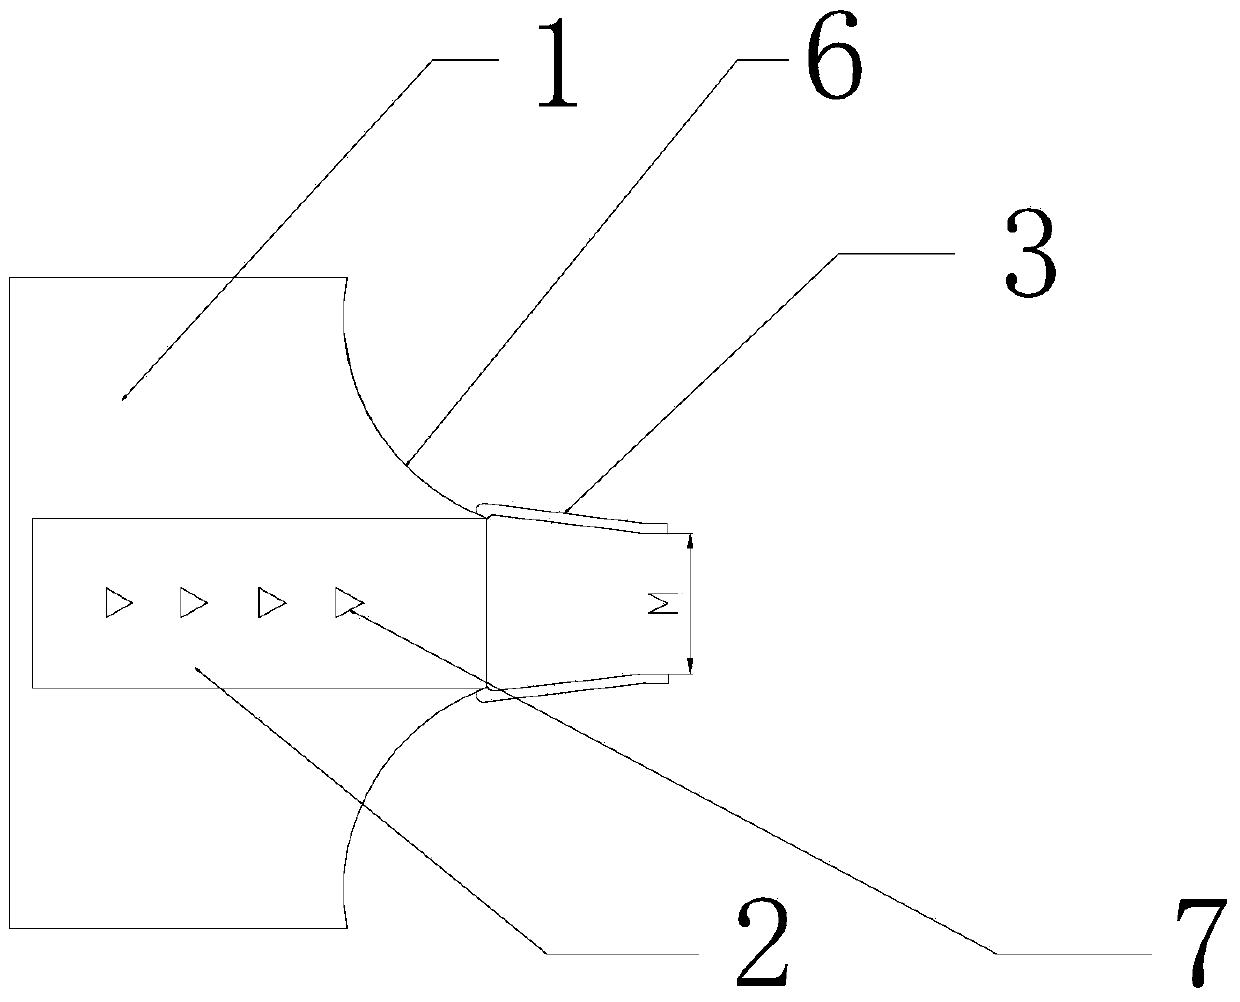 Band steel traction connection structure and band penetration method for continuous band steel unit